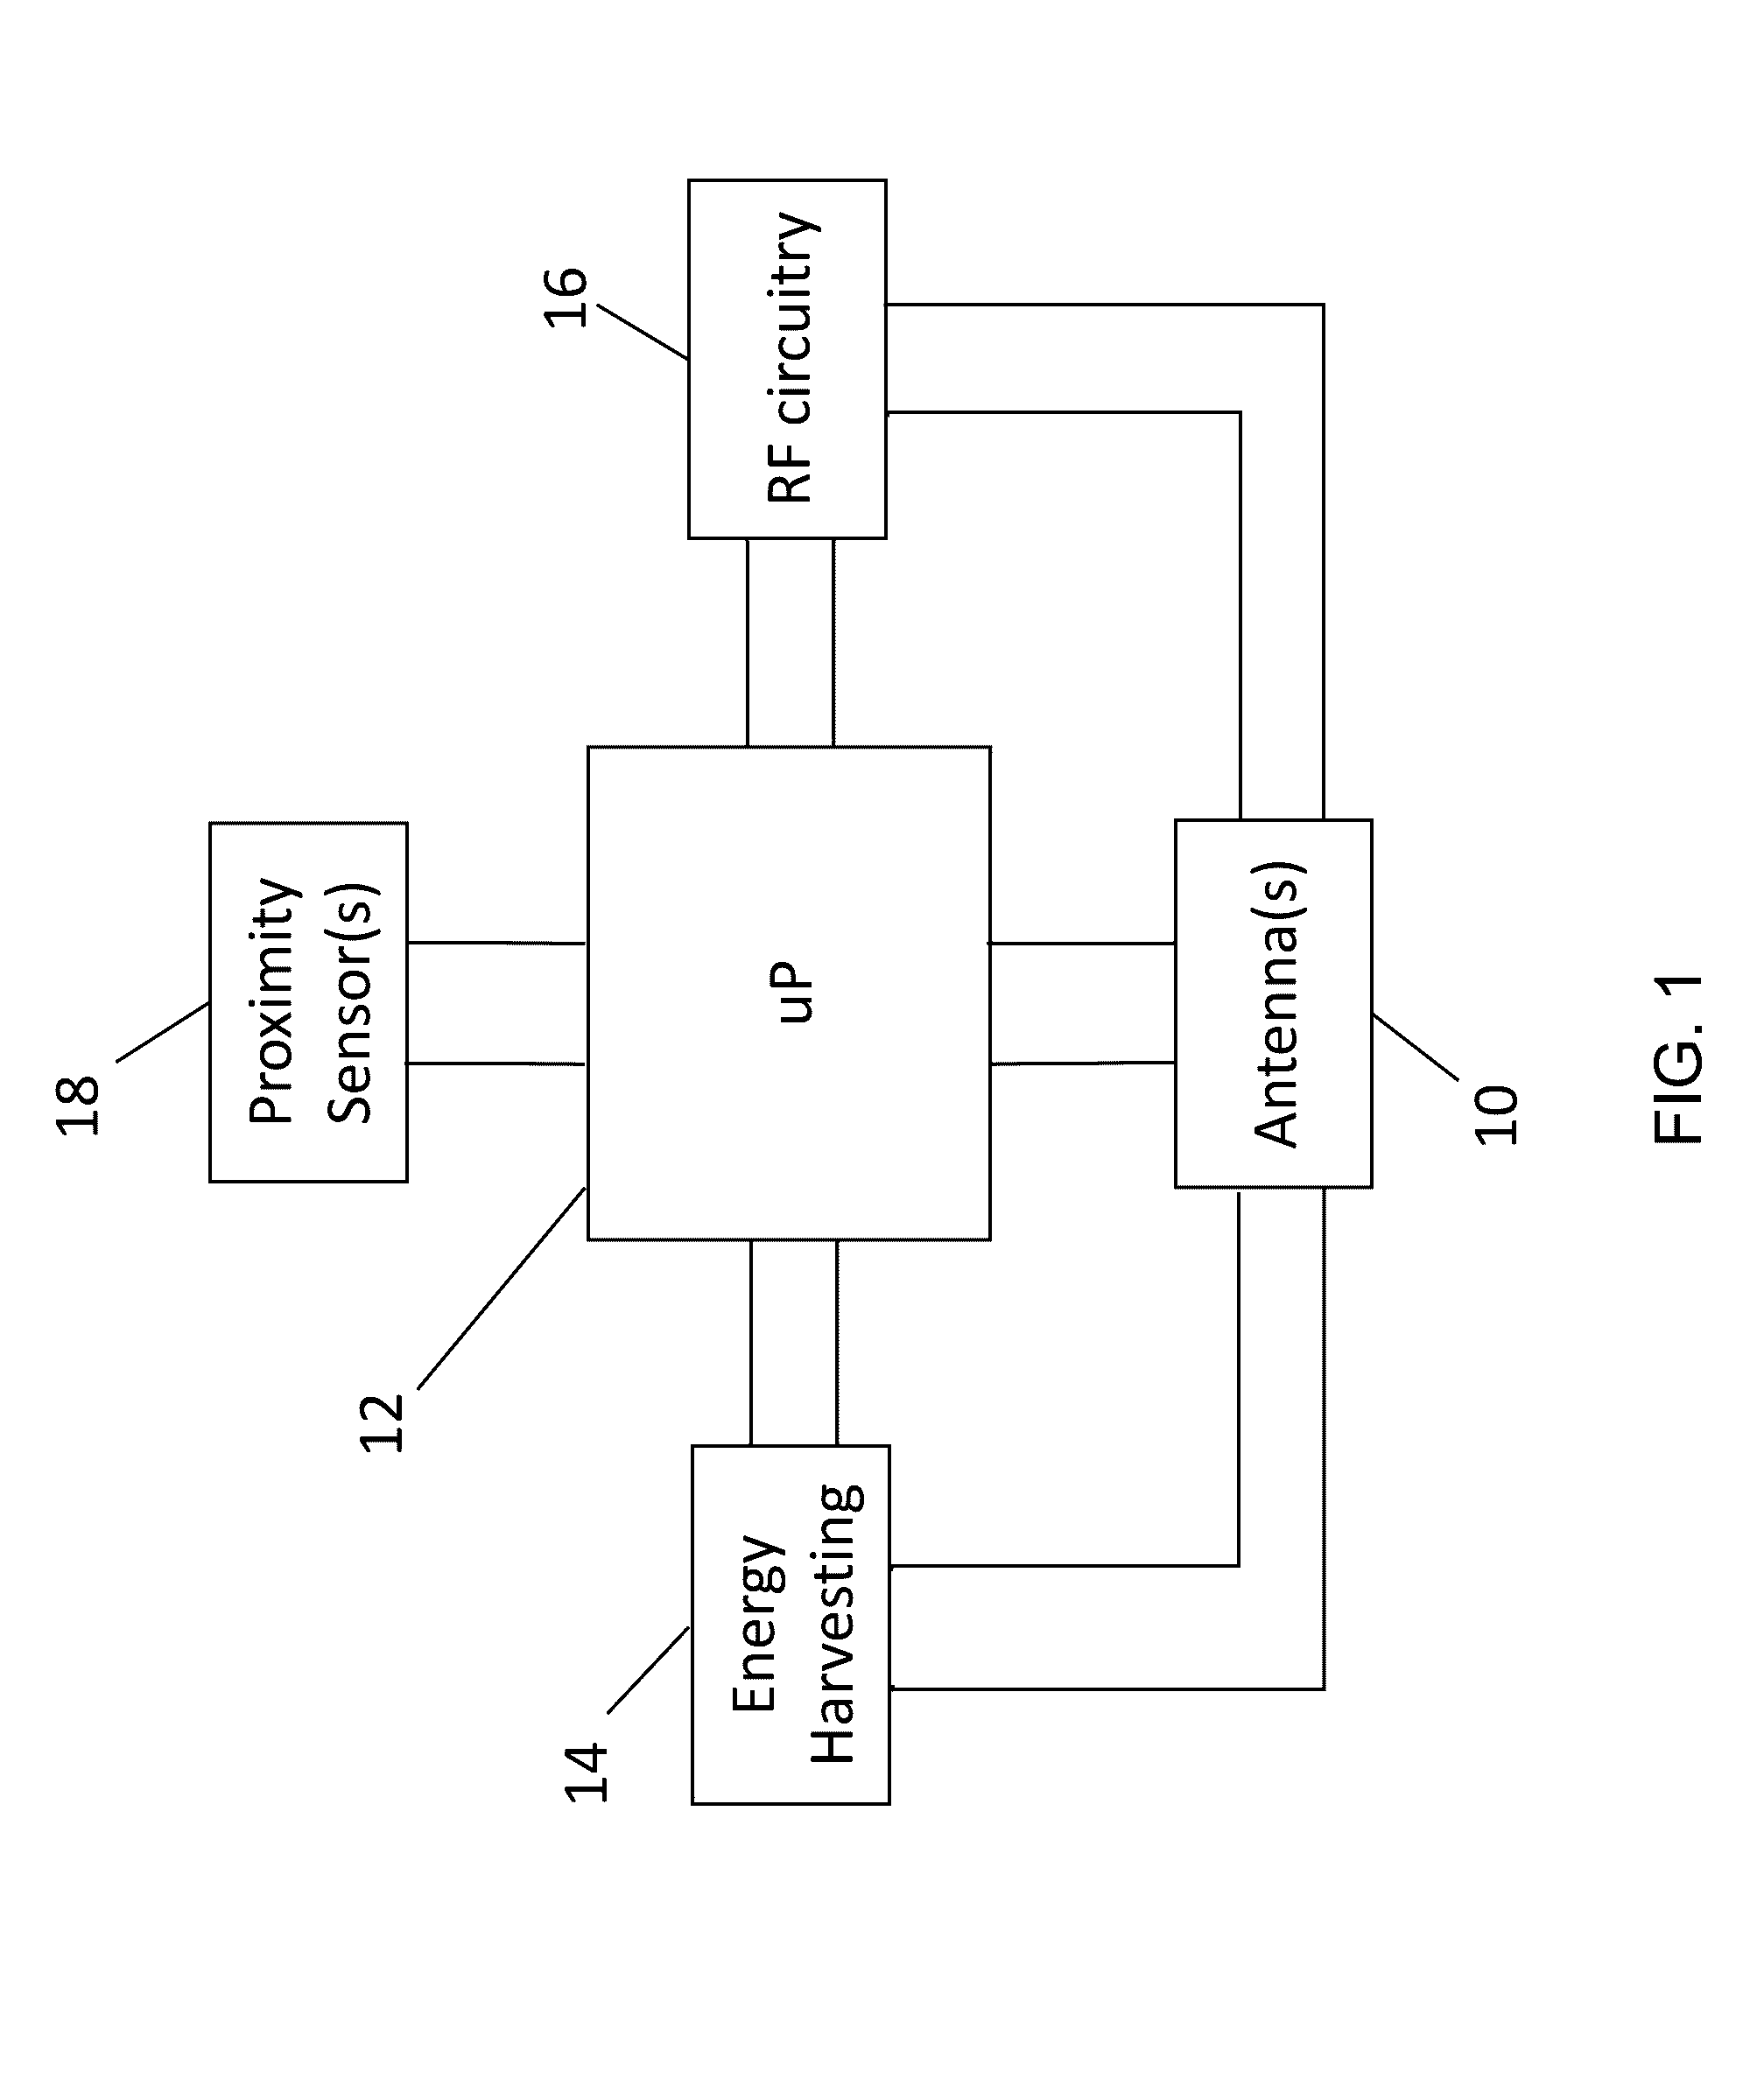 System and Method for Low-Power Close-Proximity Communications and Energy Transfer Using a Miniture Multi-Purpose Antenna